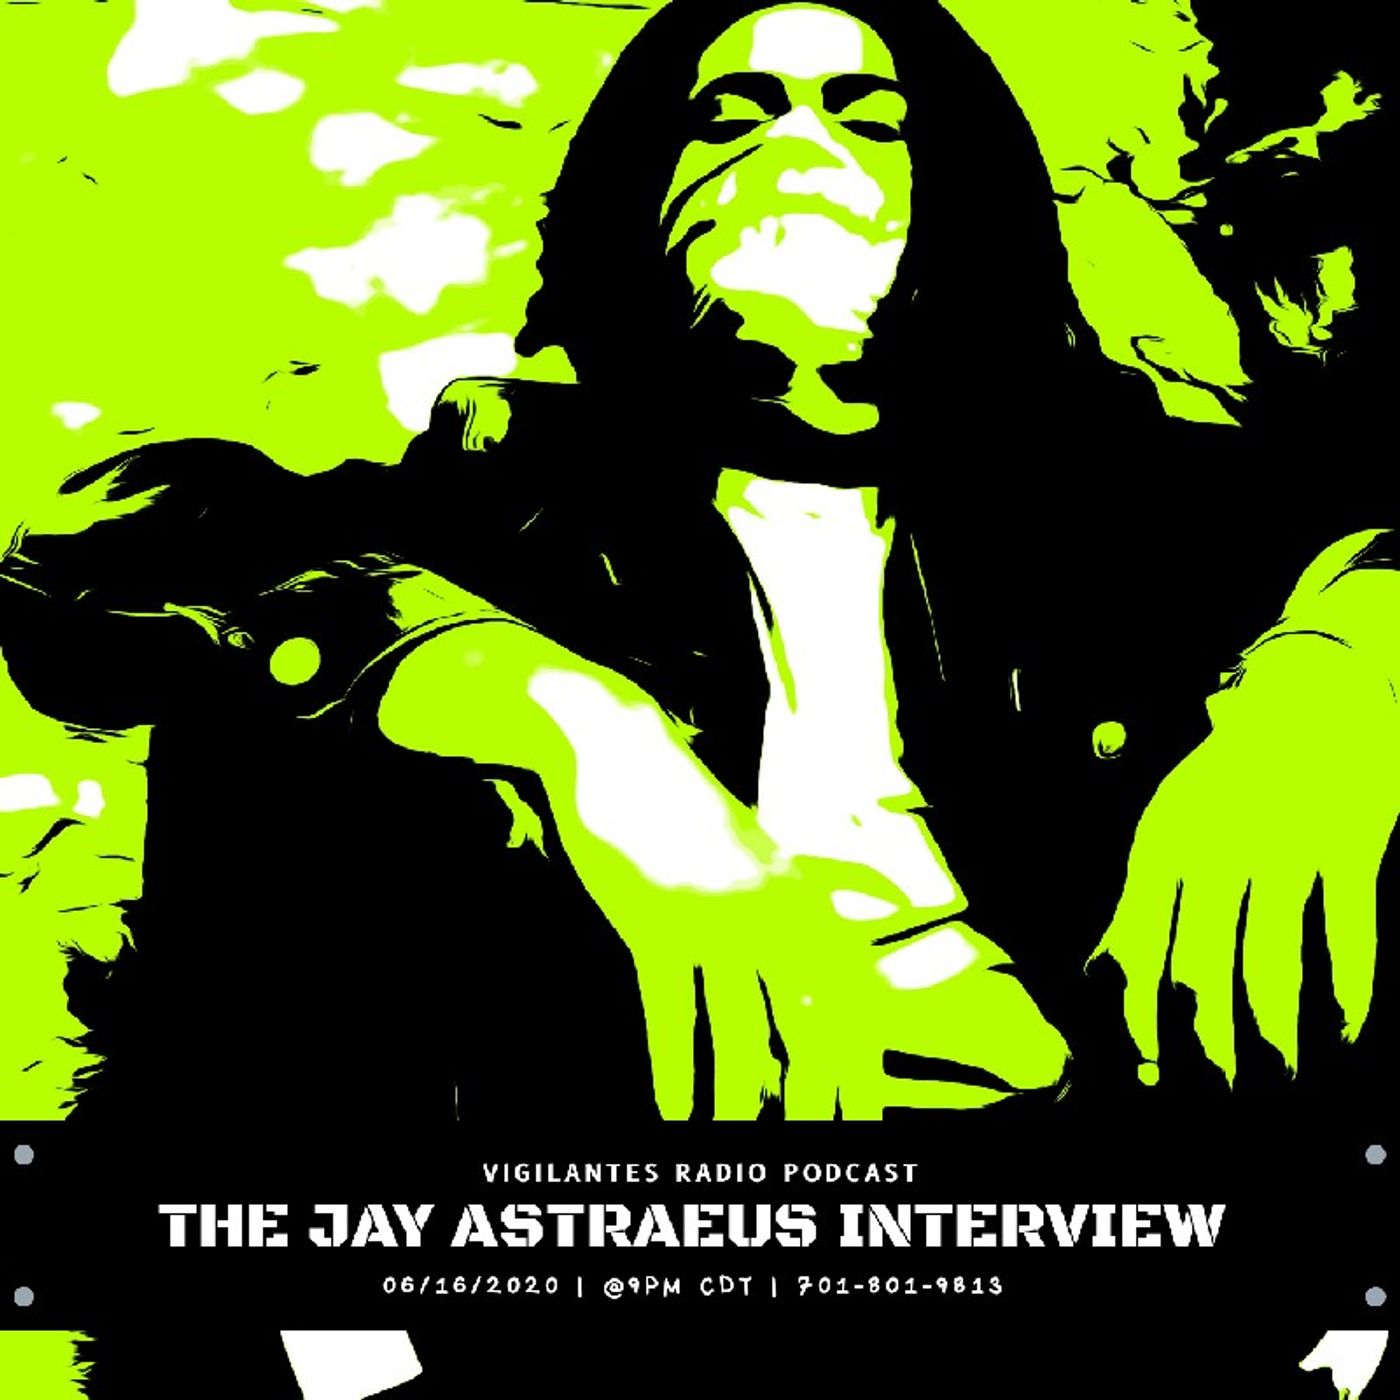 The Jay Astraeus Interview. Image